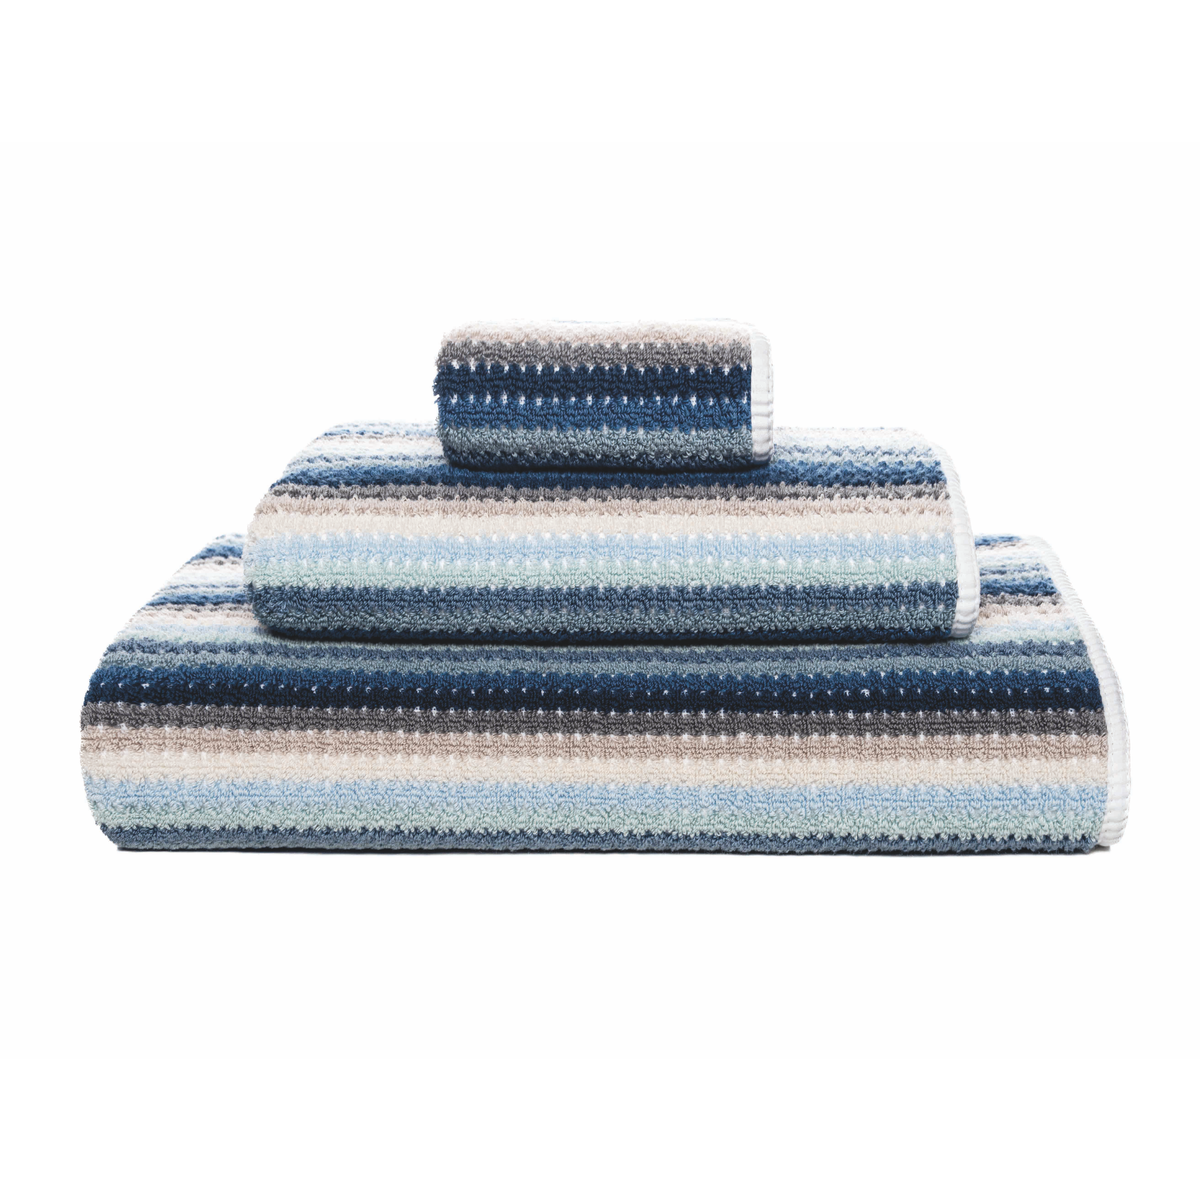 Stack of Graccioza Lollypop Bath Towels Against White Background in Blue Color